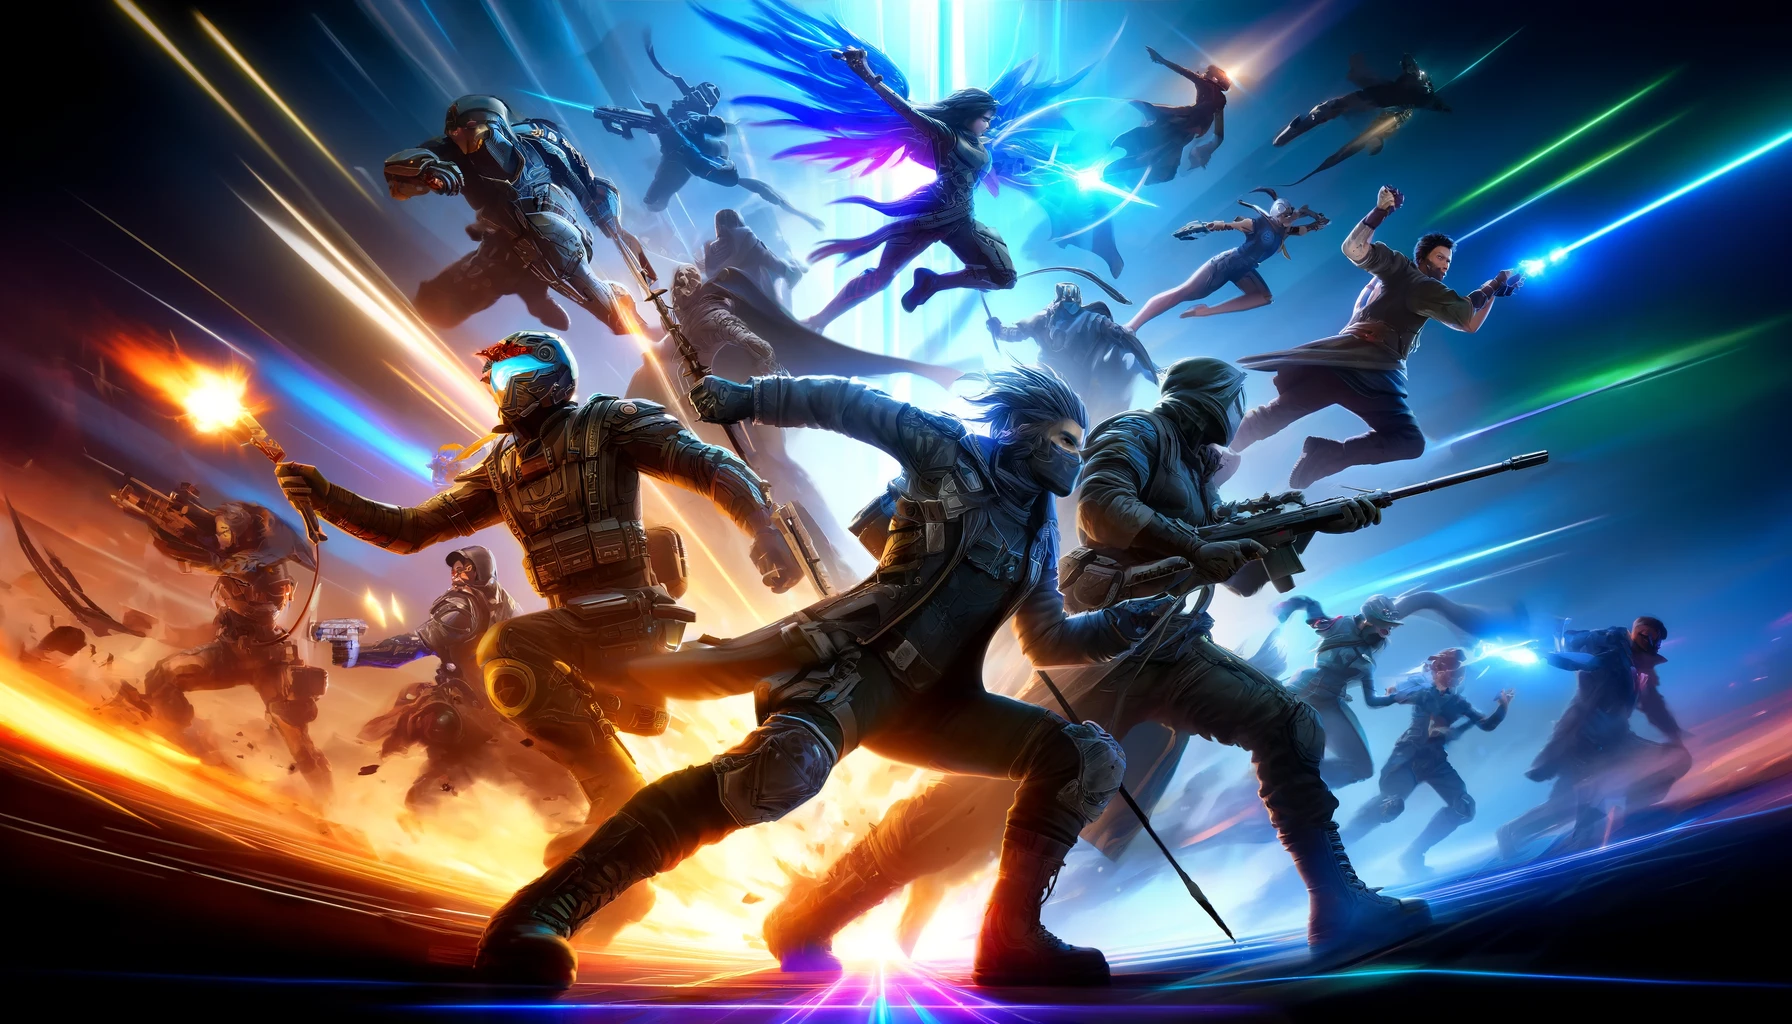 Futuristic soldiers and winged warriors clash in a dynamic battle tableau.